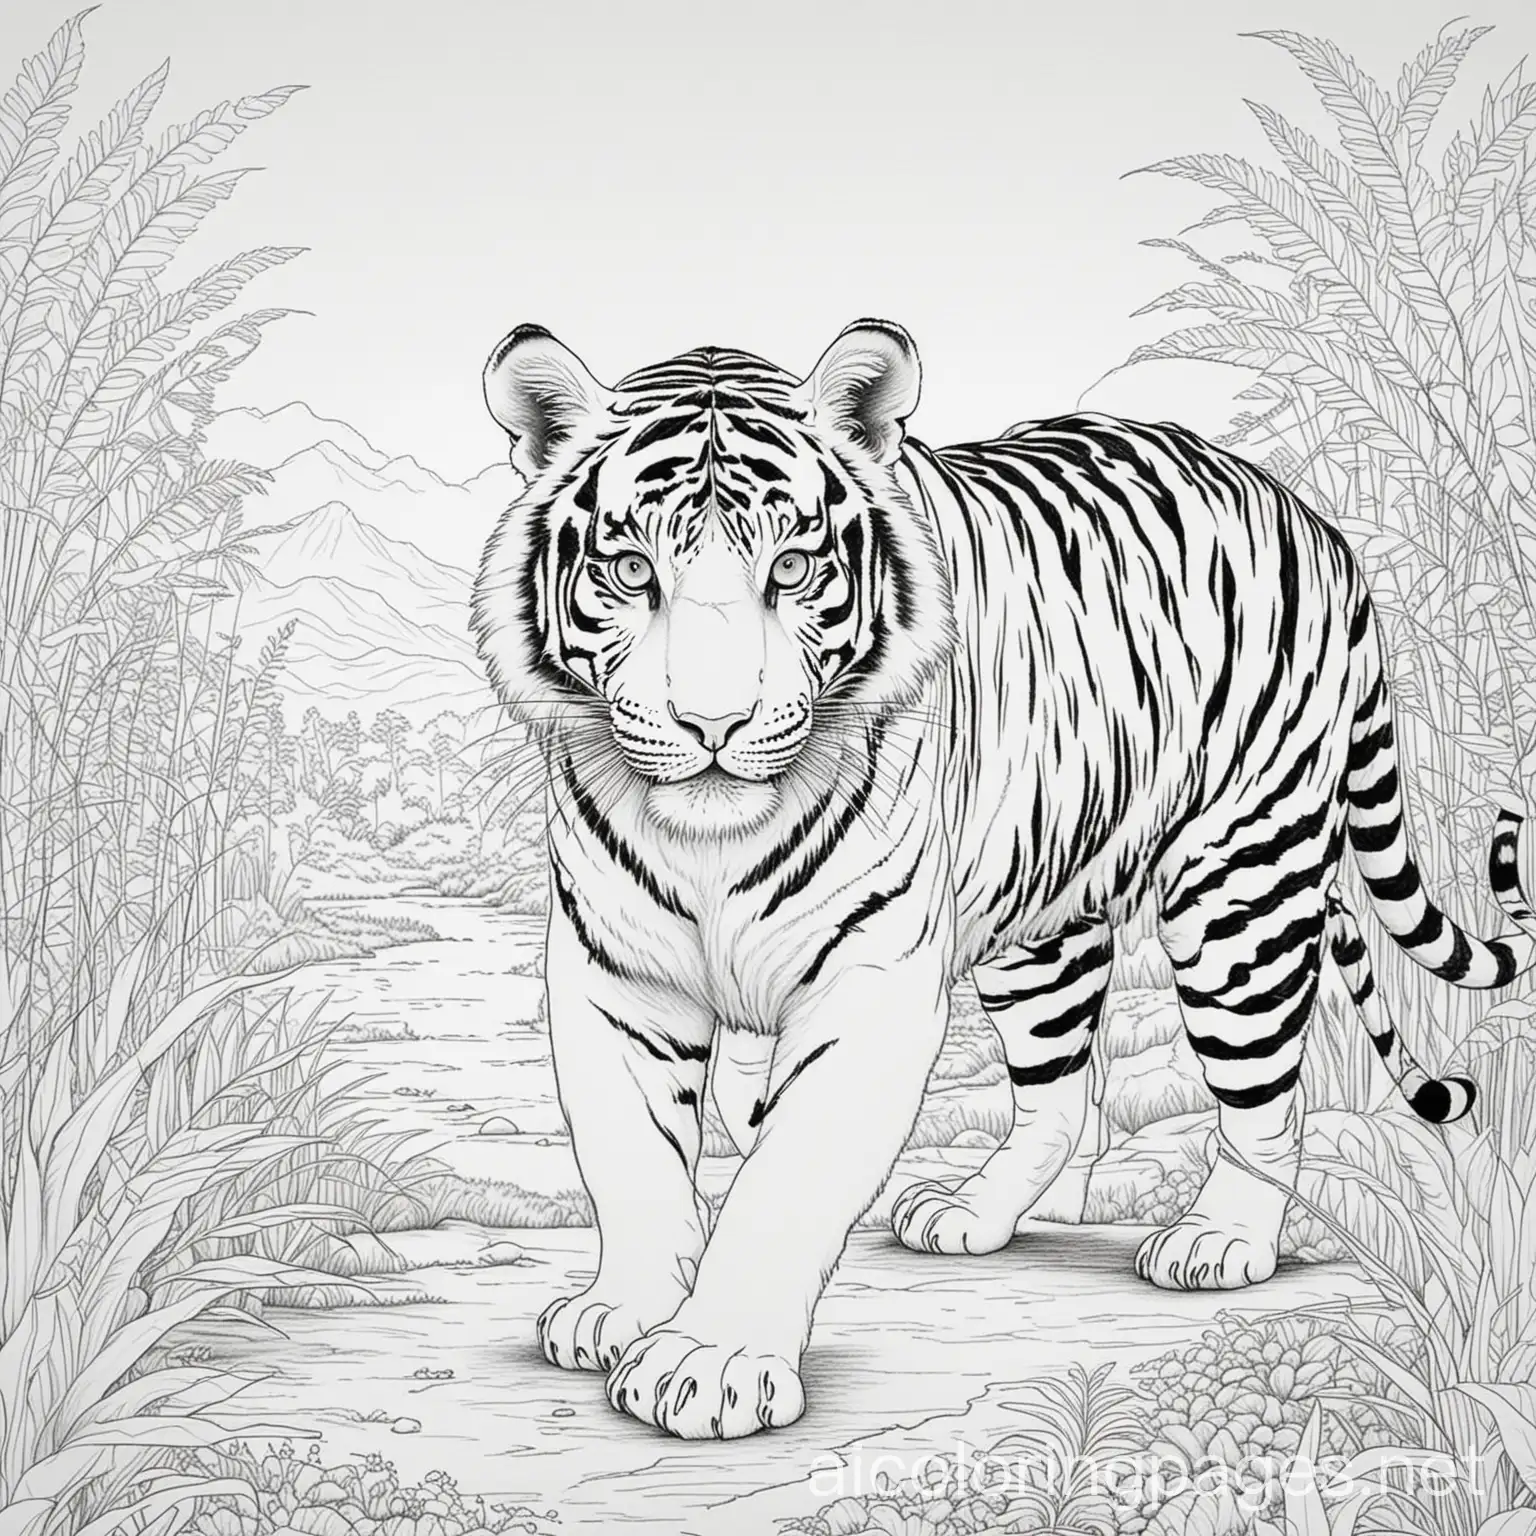 Tiger-Coloring-Page-for-Kids-Simplified-Black-and-White-Line-Art-on-White-Background